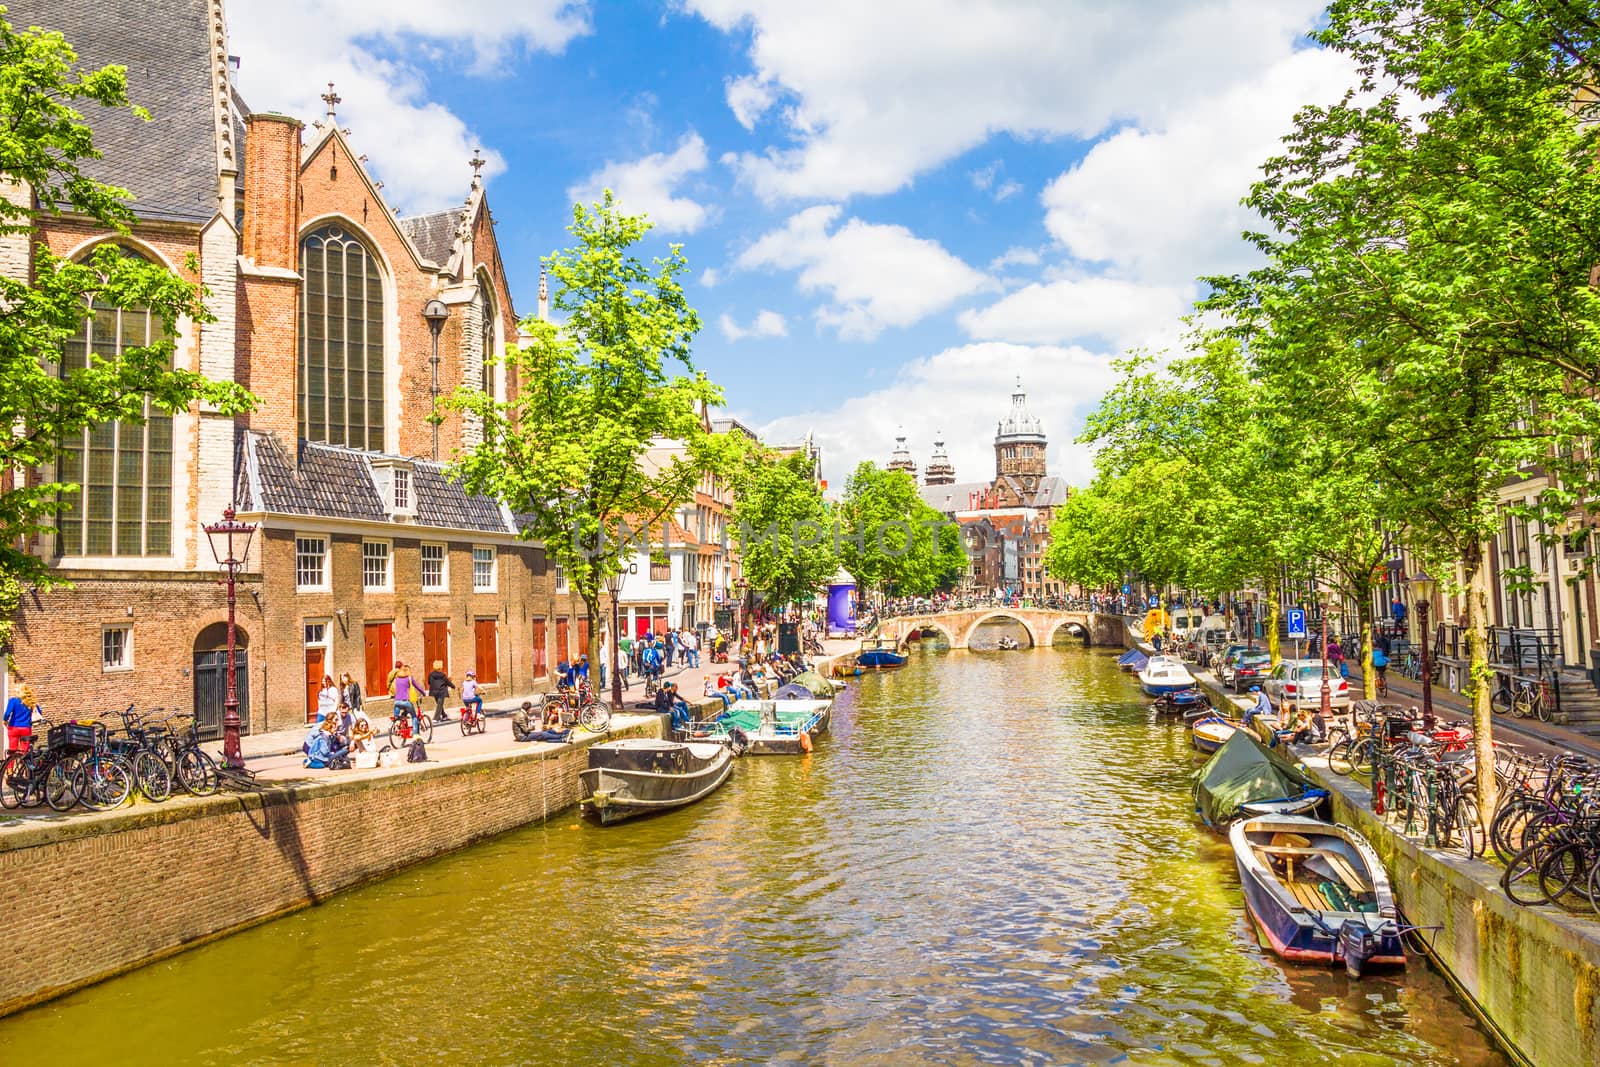 Amsterdam is the capital of the Netherlands and the canals and harbours fill a full quarter of the city surface.